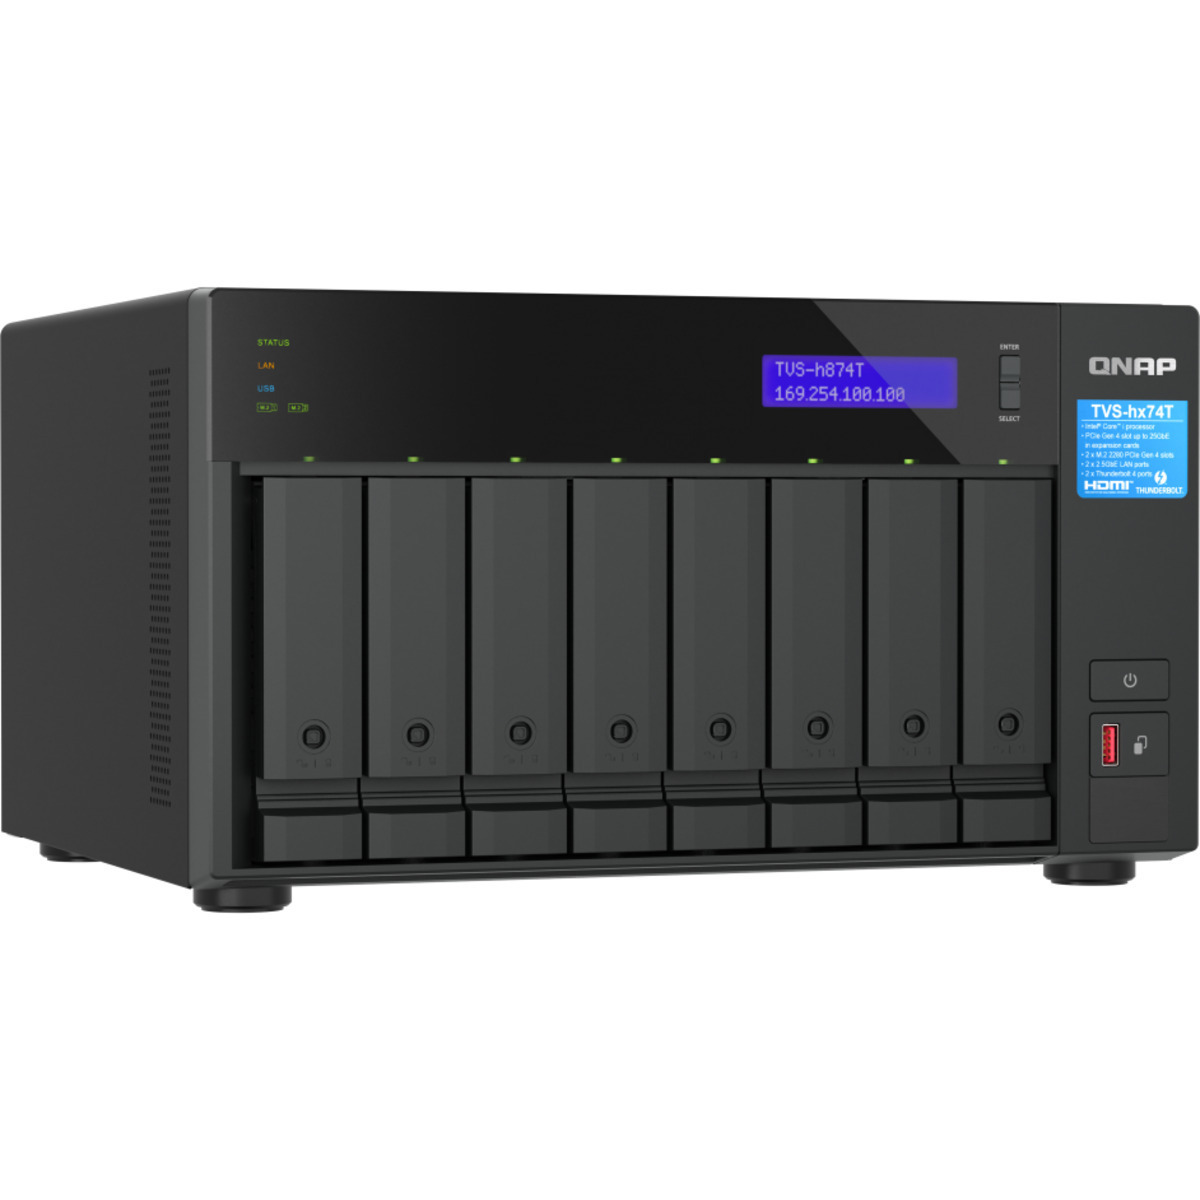 QNAP TVS-h874T Core i9 Thunderbolt 4 120tb 8-Bay Desktop Multimedia / Power User / Business DAS-NAS - Combo Direct + Network Storage Device 6x20tb Seagate IronWolf Pro ST20000NT001 3.5 7200rpm SATA 6Gb/s HDD NAS Class Drives Installed - Burn-In Tested TVS-h874T Core i9 Thunderbolt 4